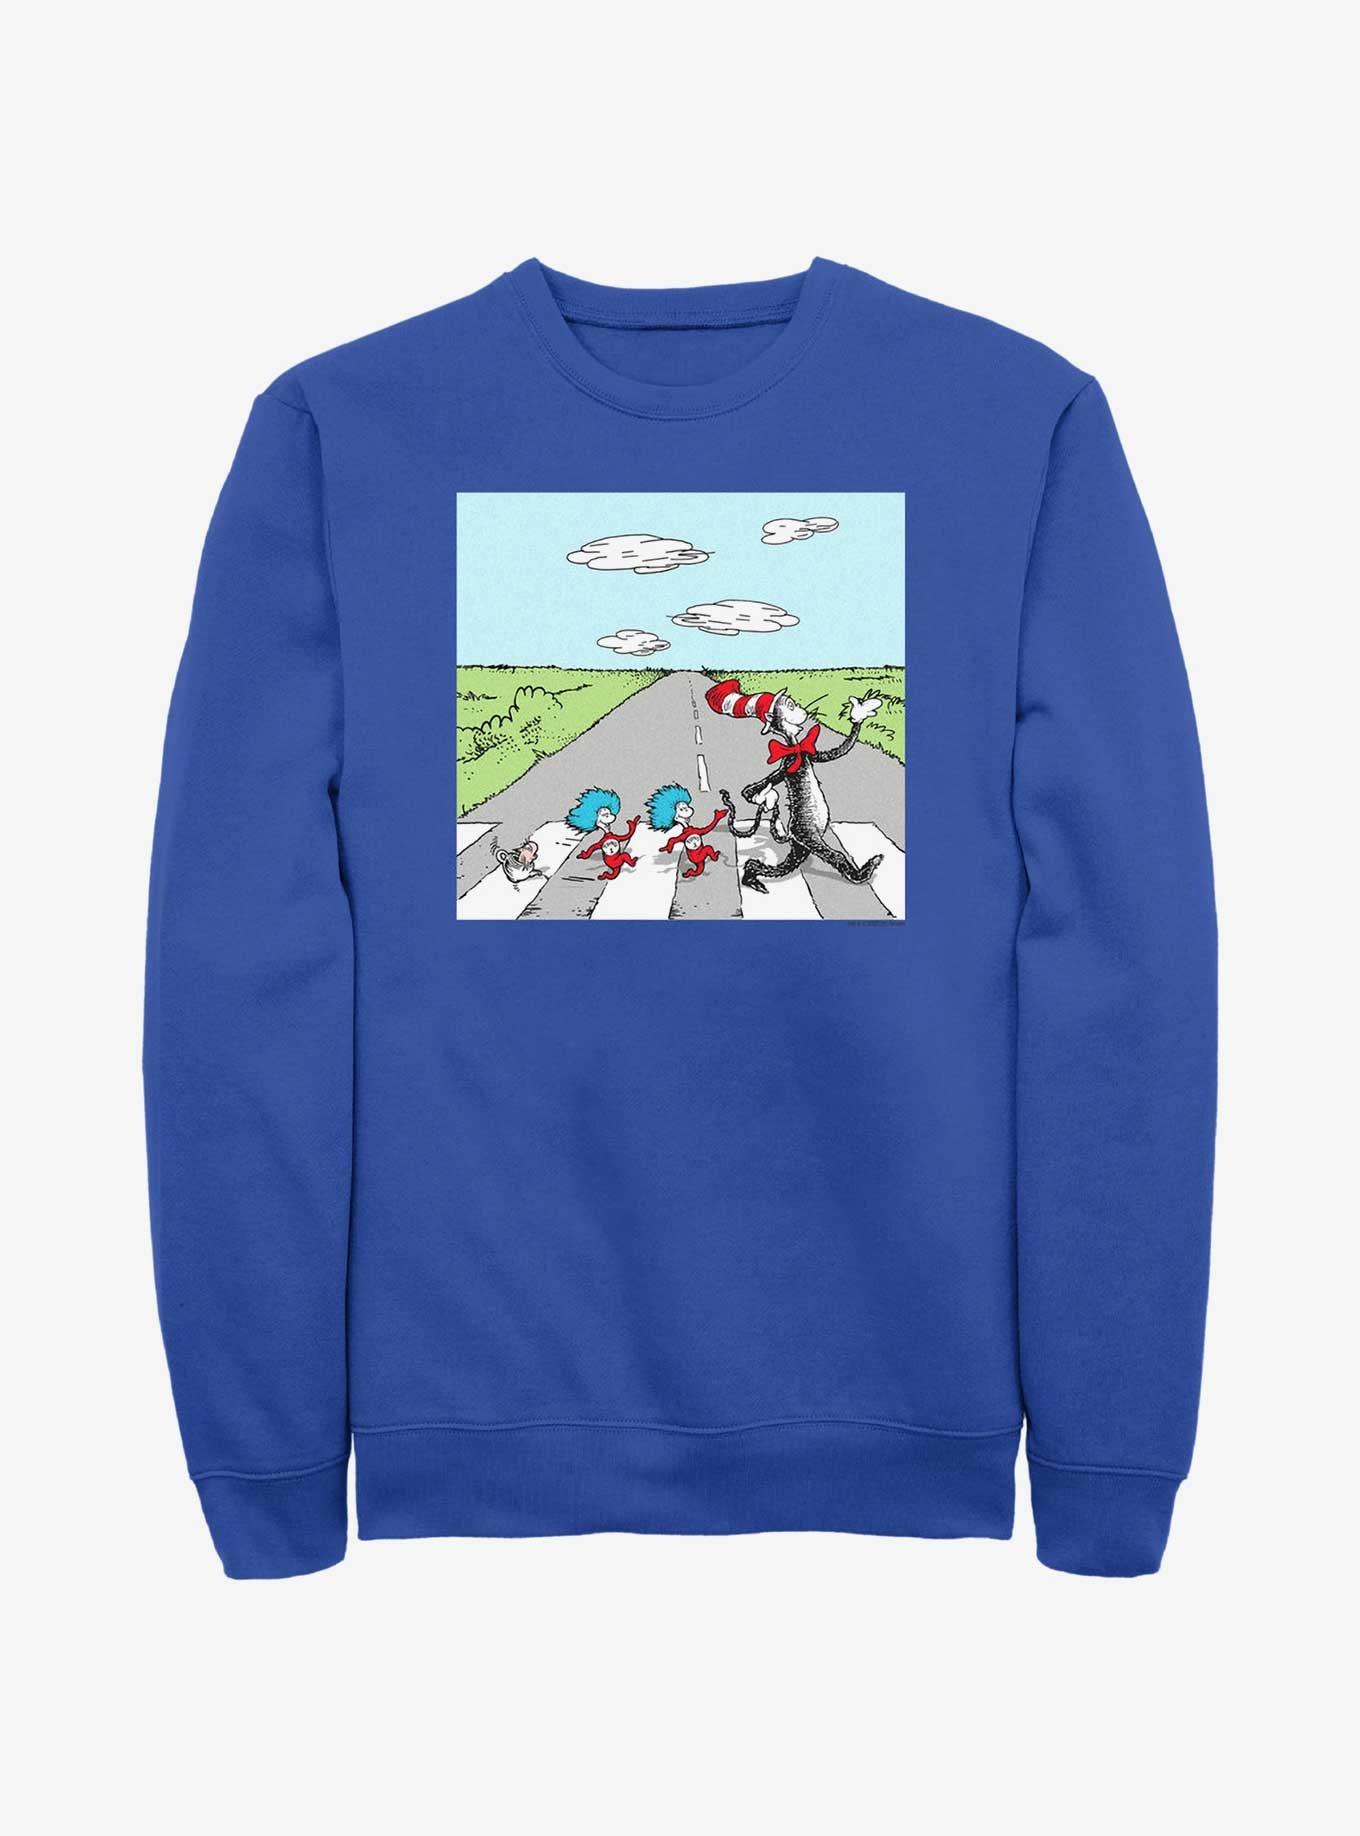 Dr. Seuss The Cat In The Hat and Things Crossing Sweatshirt, ROYAL, hi-res